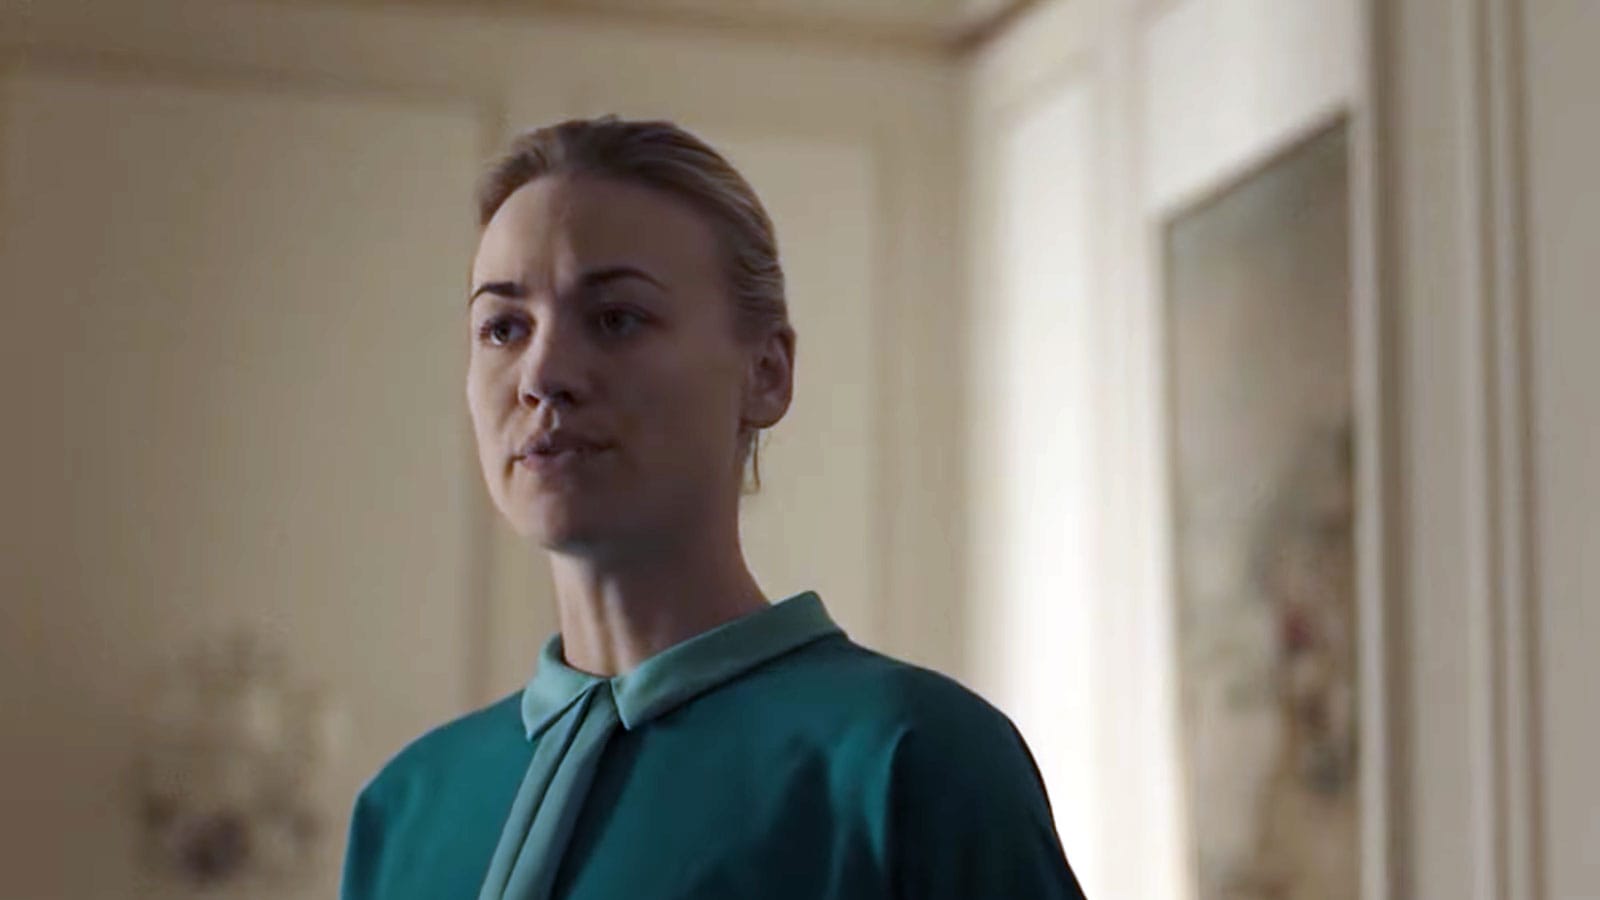 Severe and cruel, a lady authoritarian in a green dress: Yvonne Strahovski in the role of Serena Joy Waterford in 'A Handmaid's Tale'